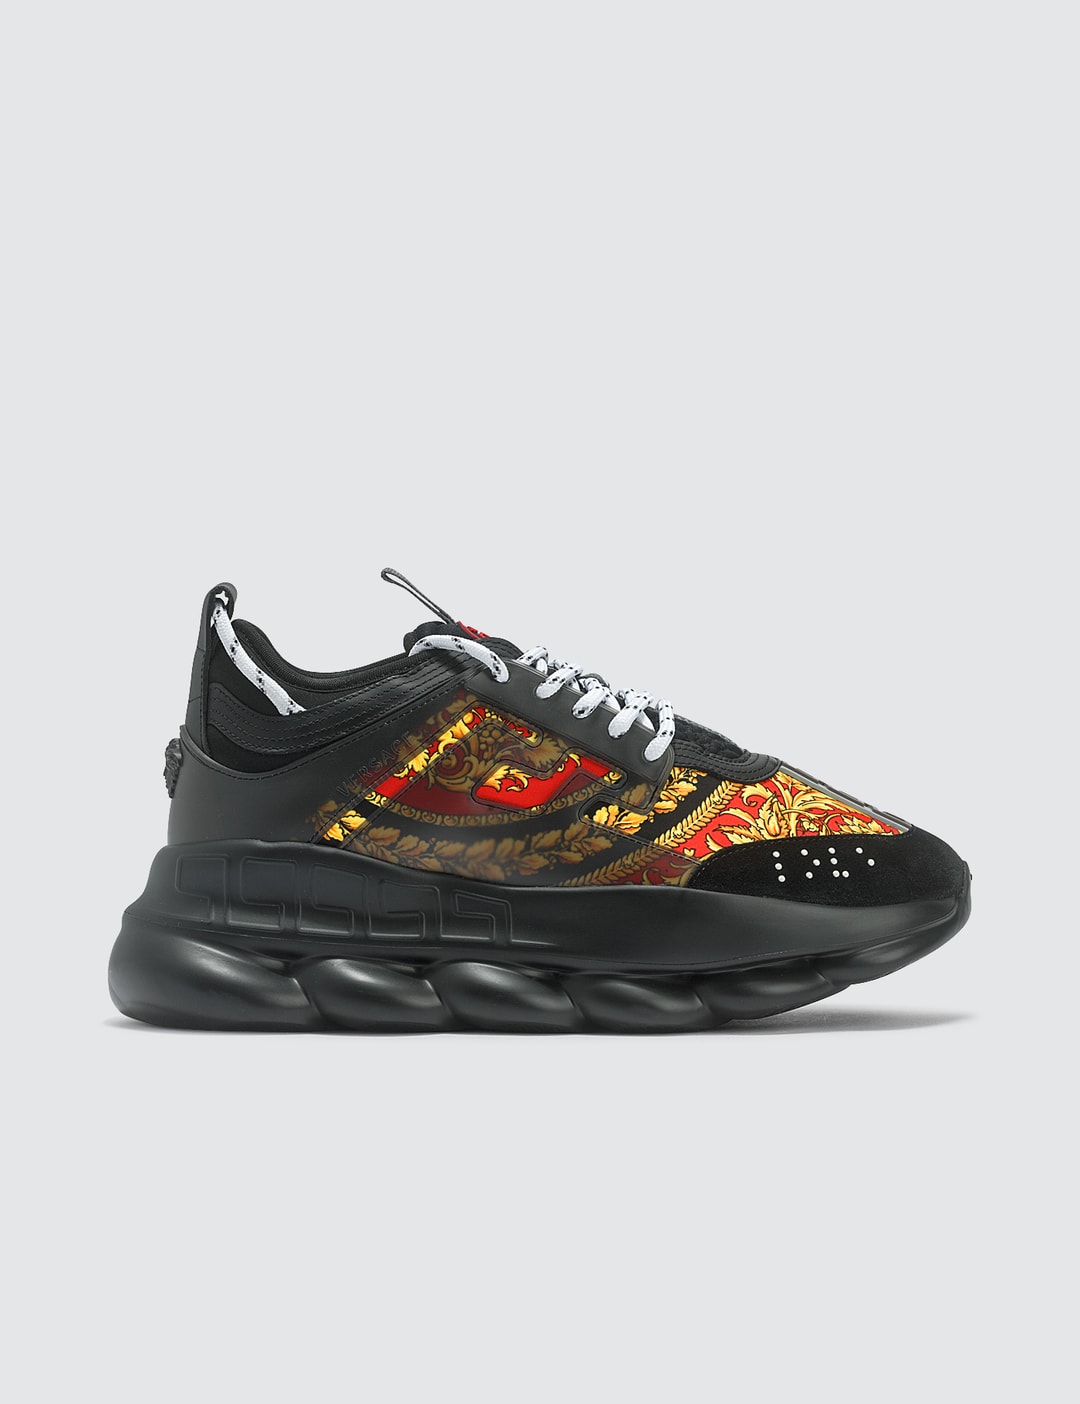 Versace Chain Reaction Red Sneakers